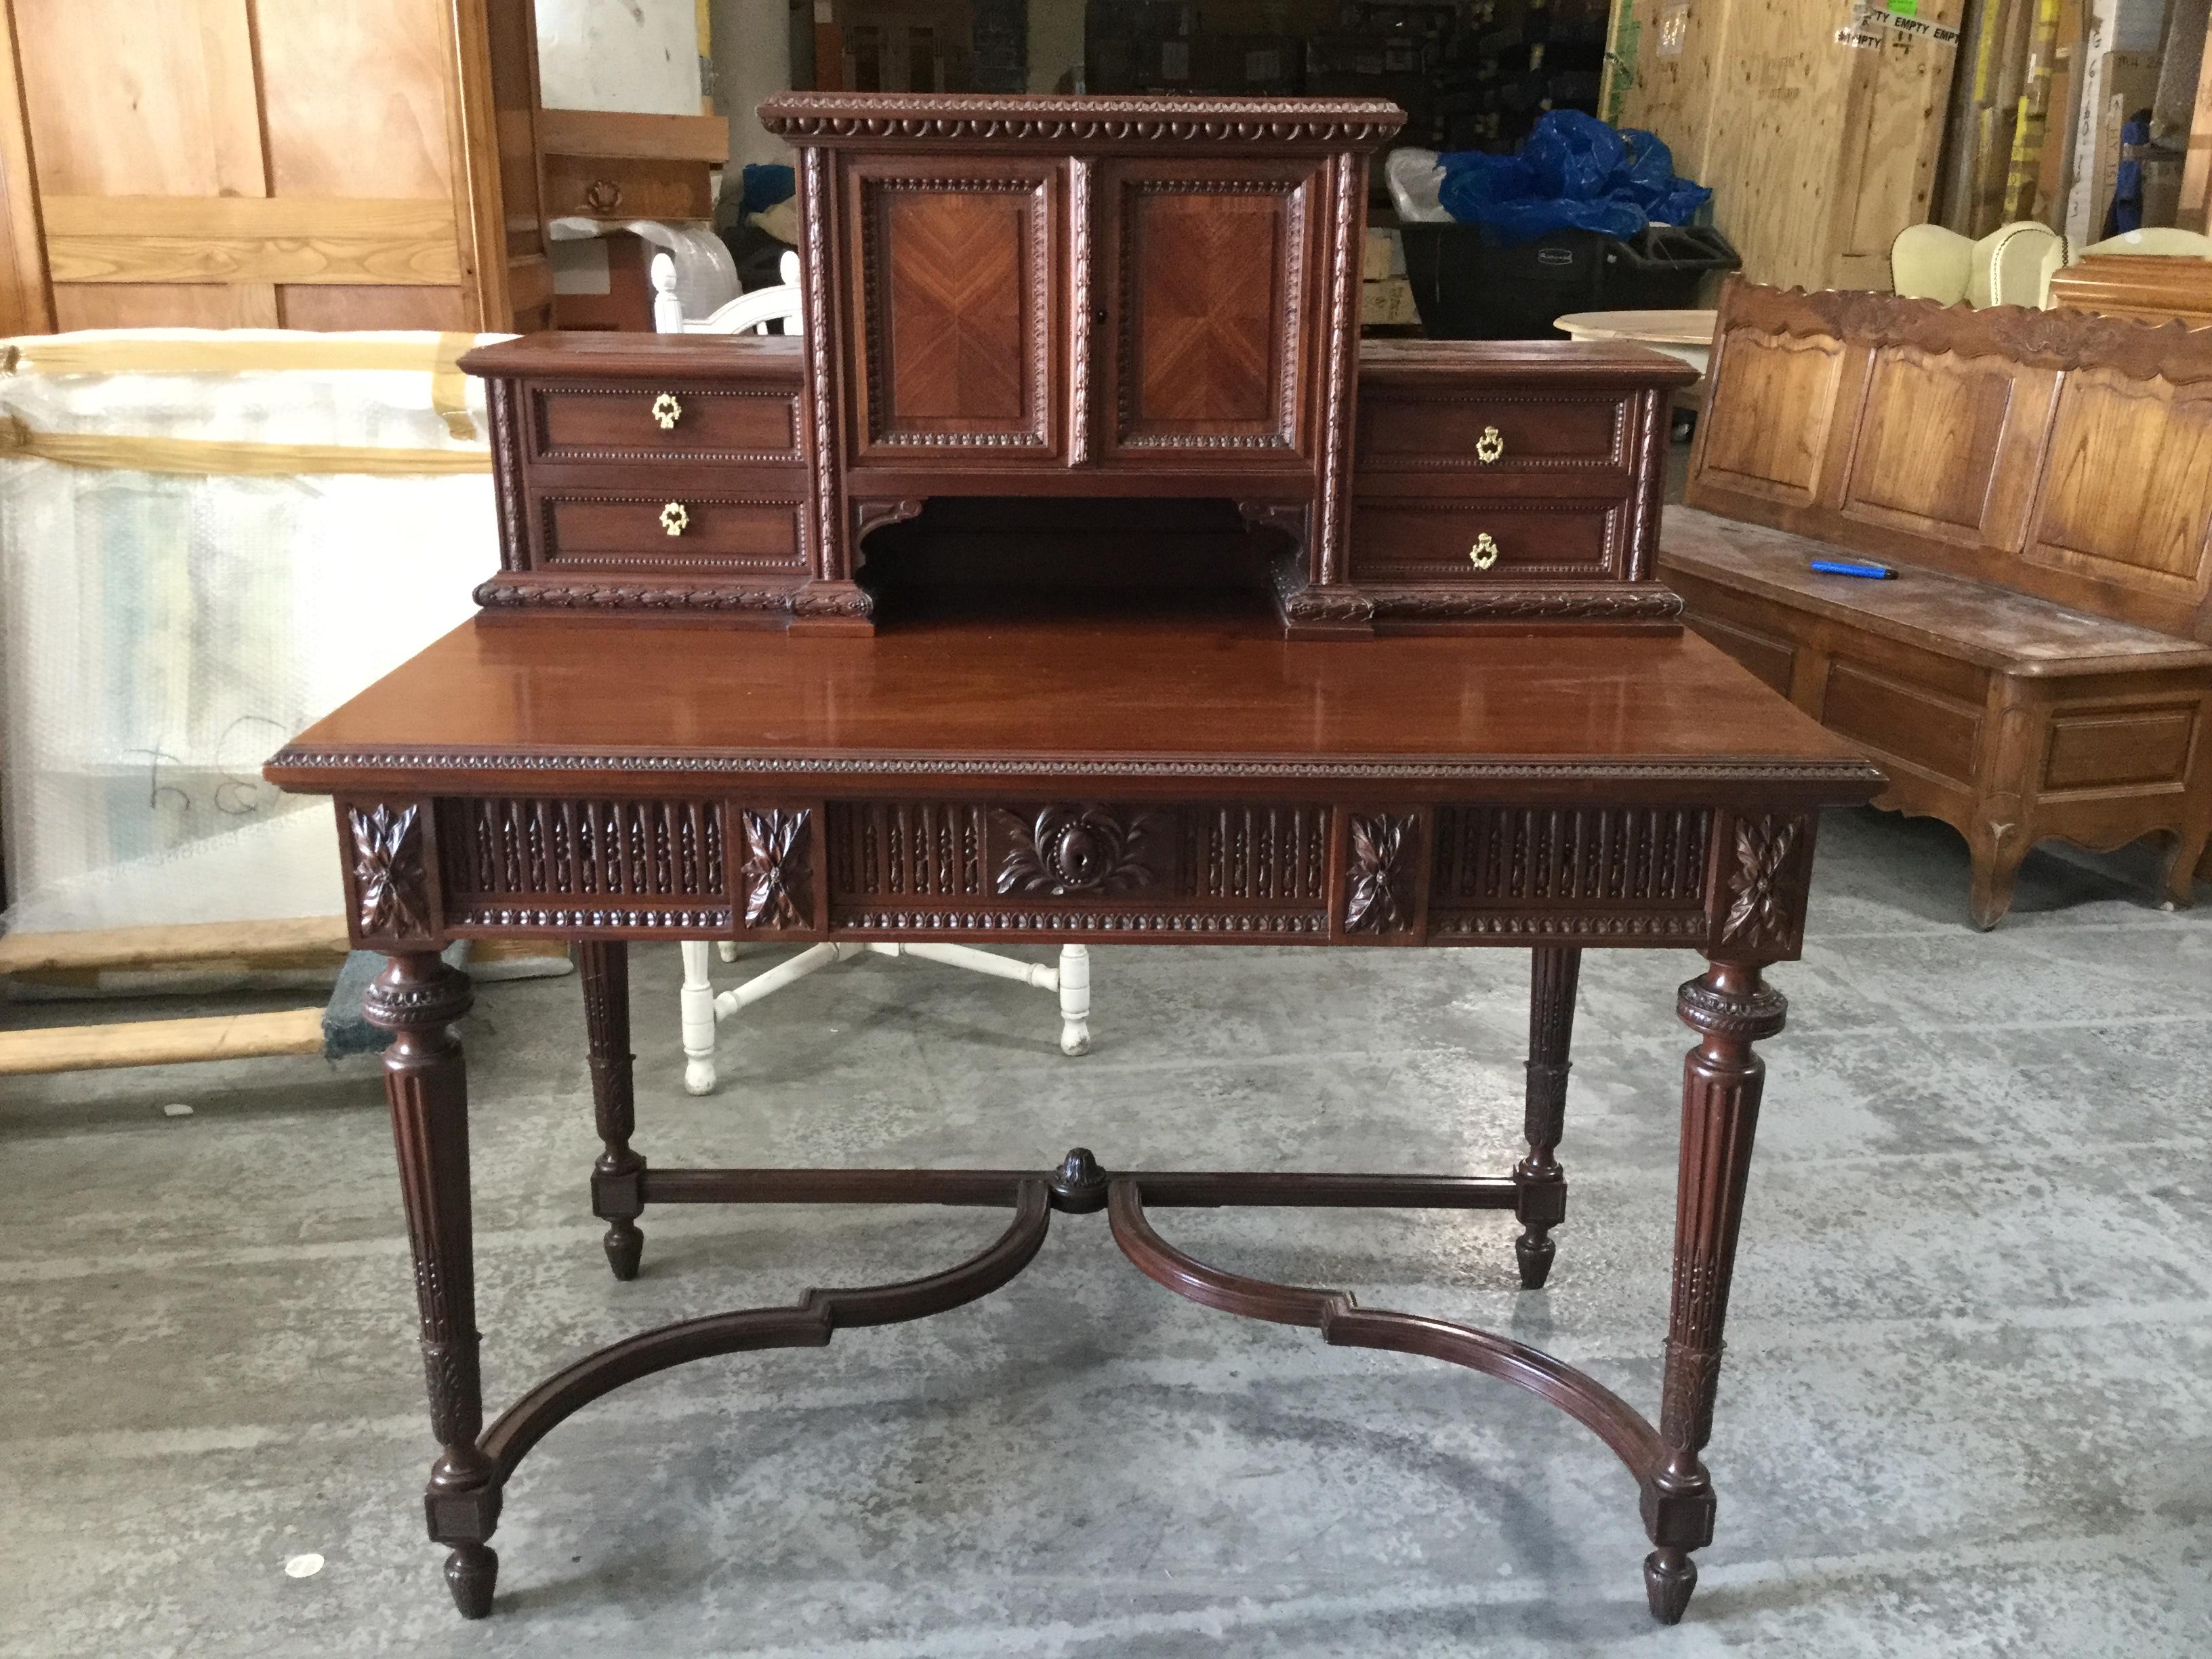 Stunning 19th century Louis XVI style writing desk. Made of solid mahogany, this piece features a flat work space and a top shelf which provides 4 small drawers and a central cabinet for additional storage. The beauty of this piece is in the refined